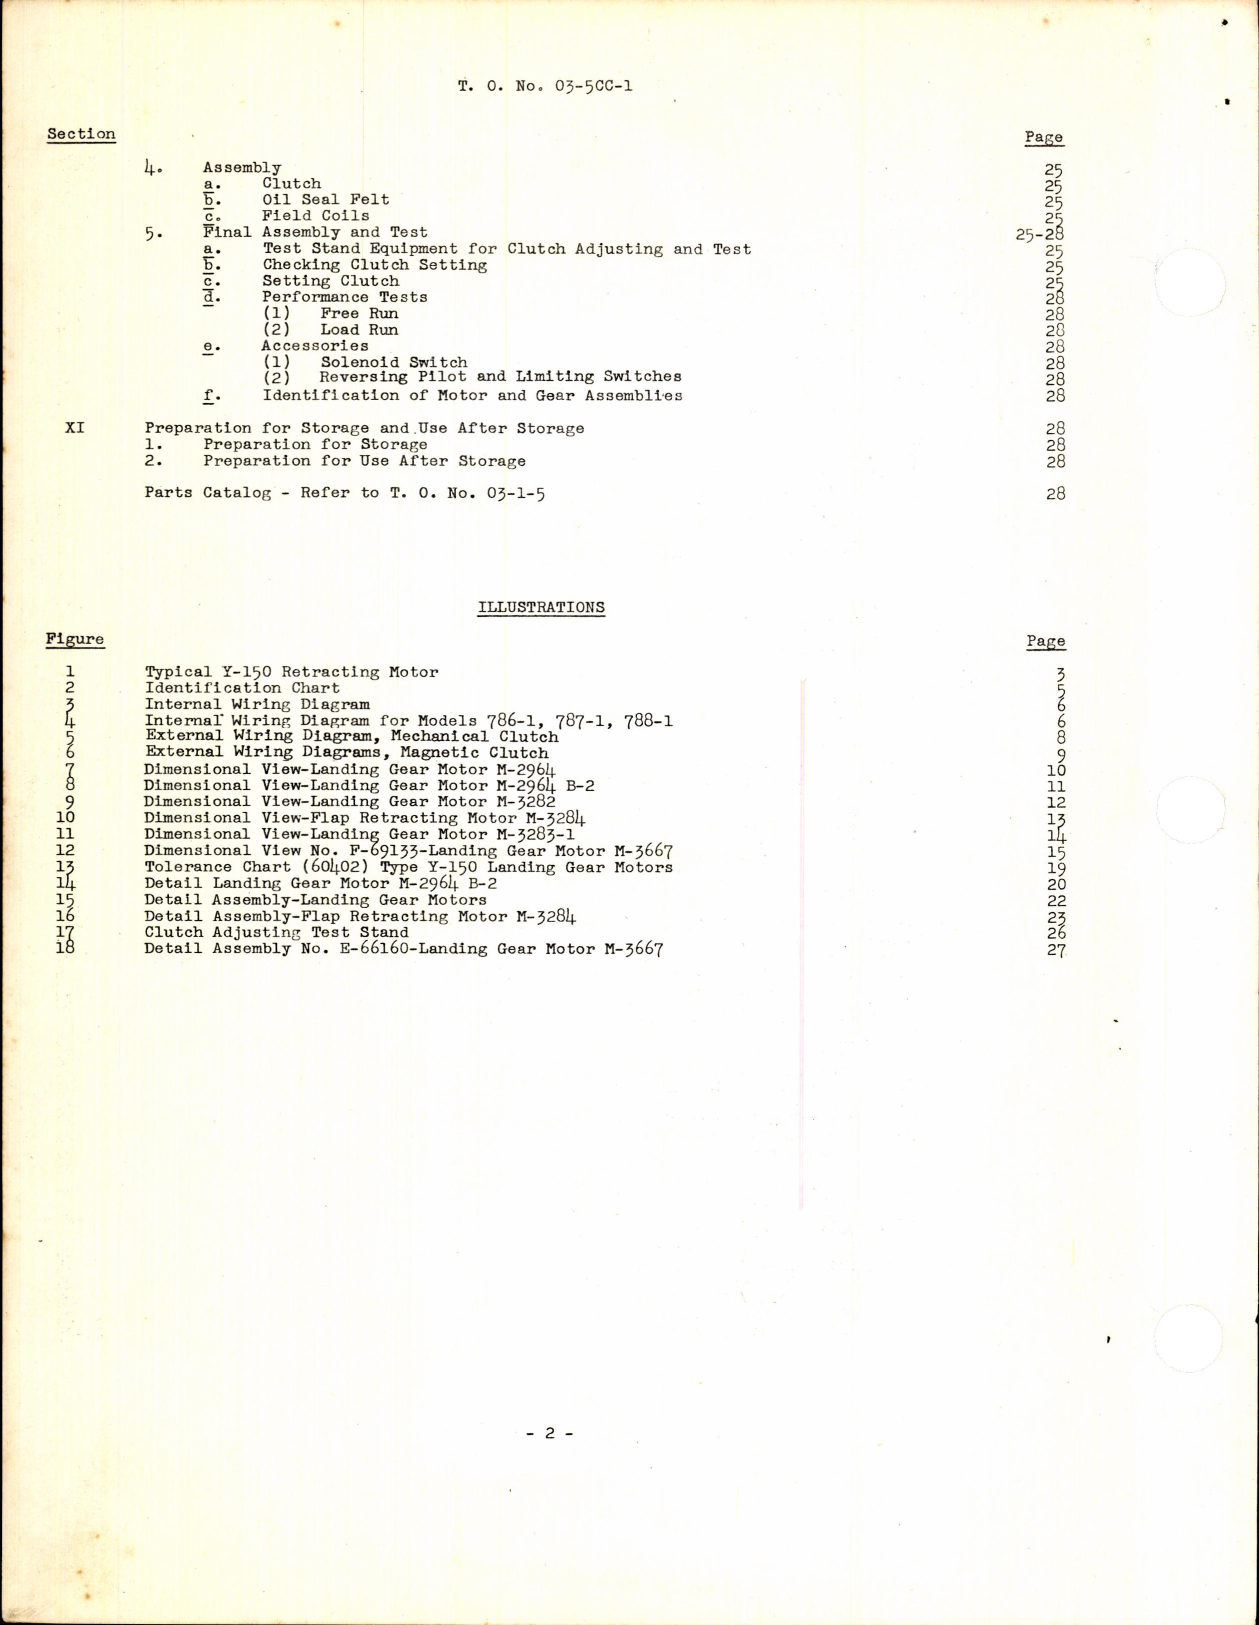 Sample page 4 from AirCorps Library document: Operation, Service, & Overhaul Instructions for Retracting Mechanism Motors